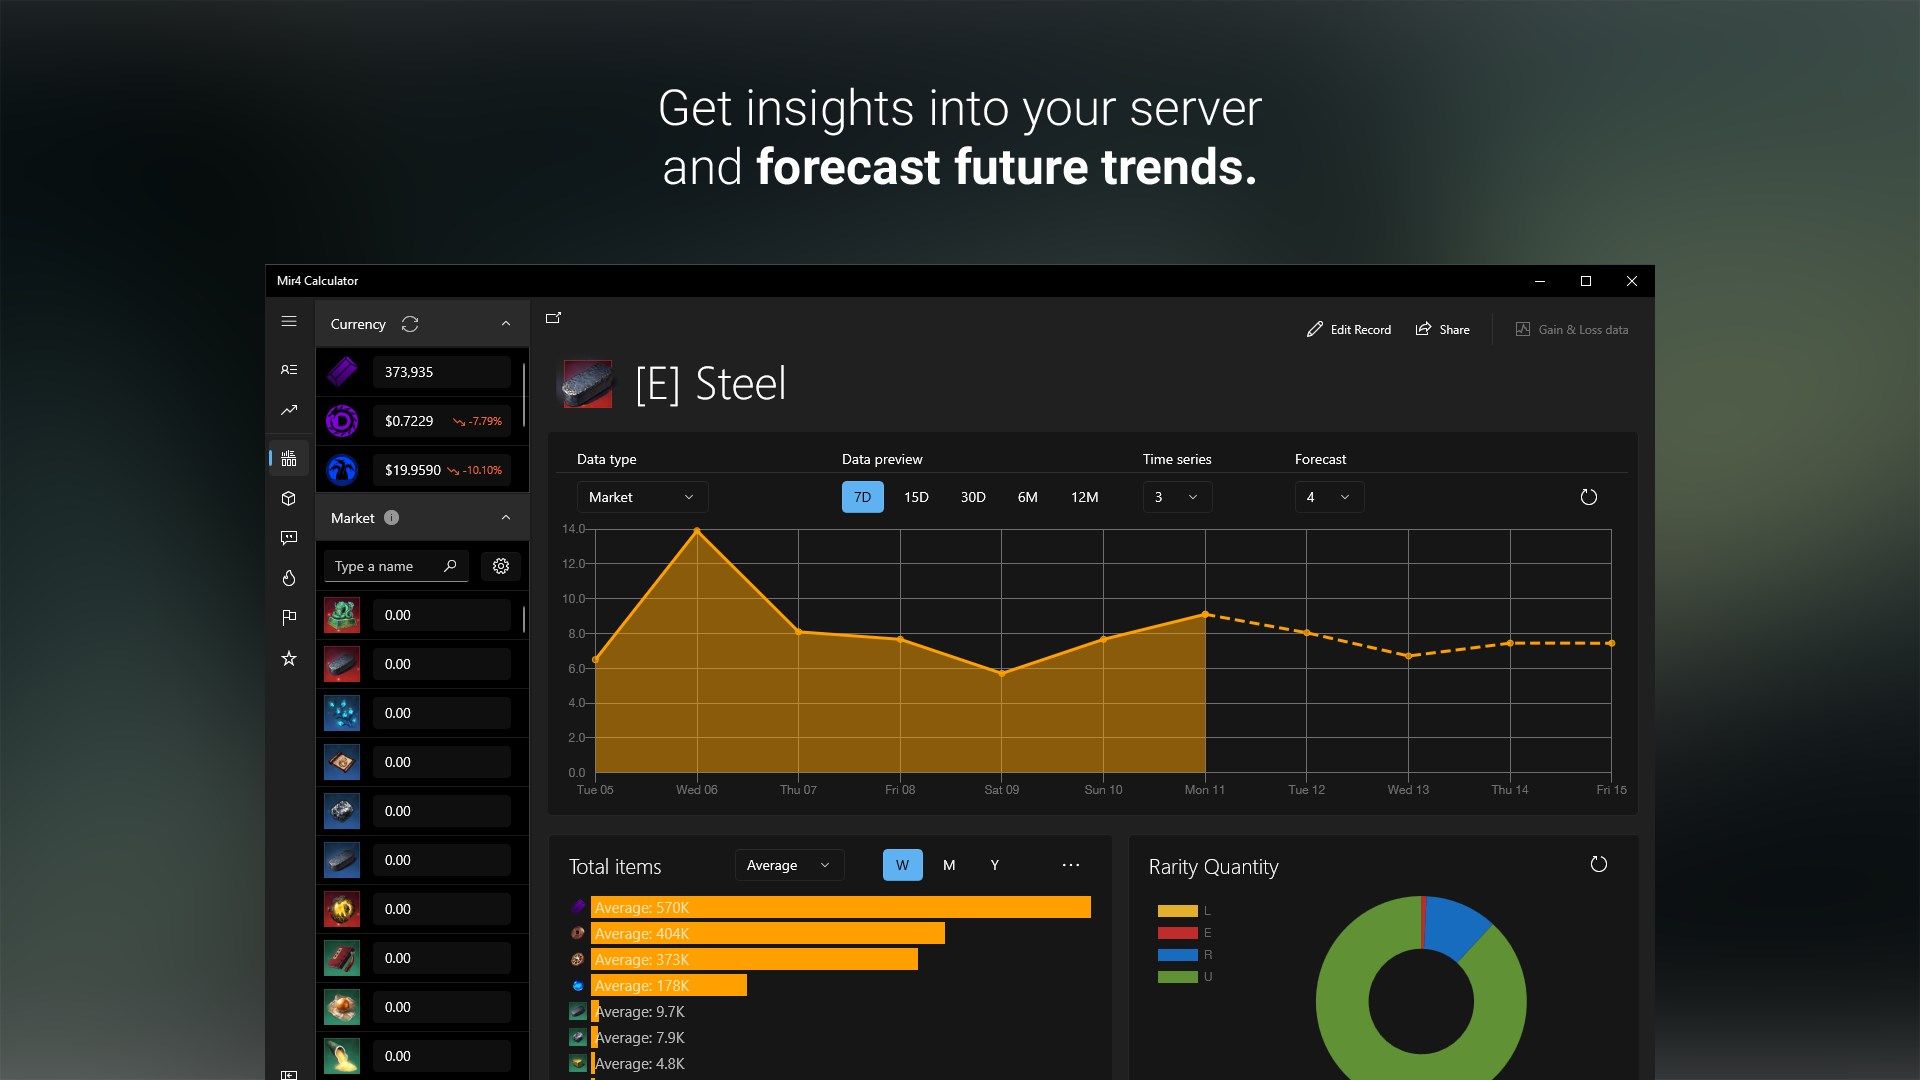 Mir4 Calculator | Get insights into your server and forecast future trends.